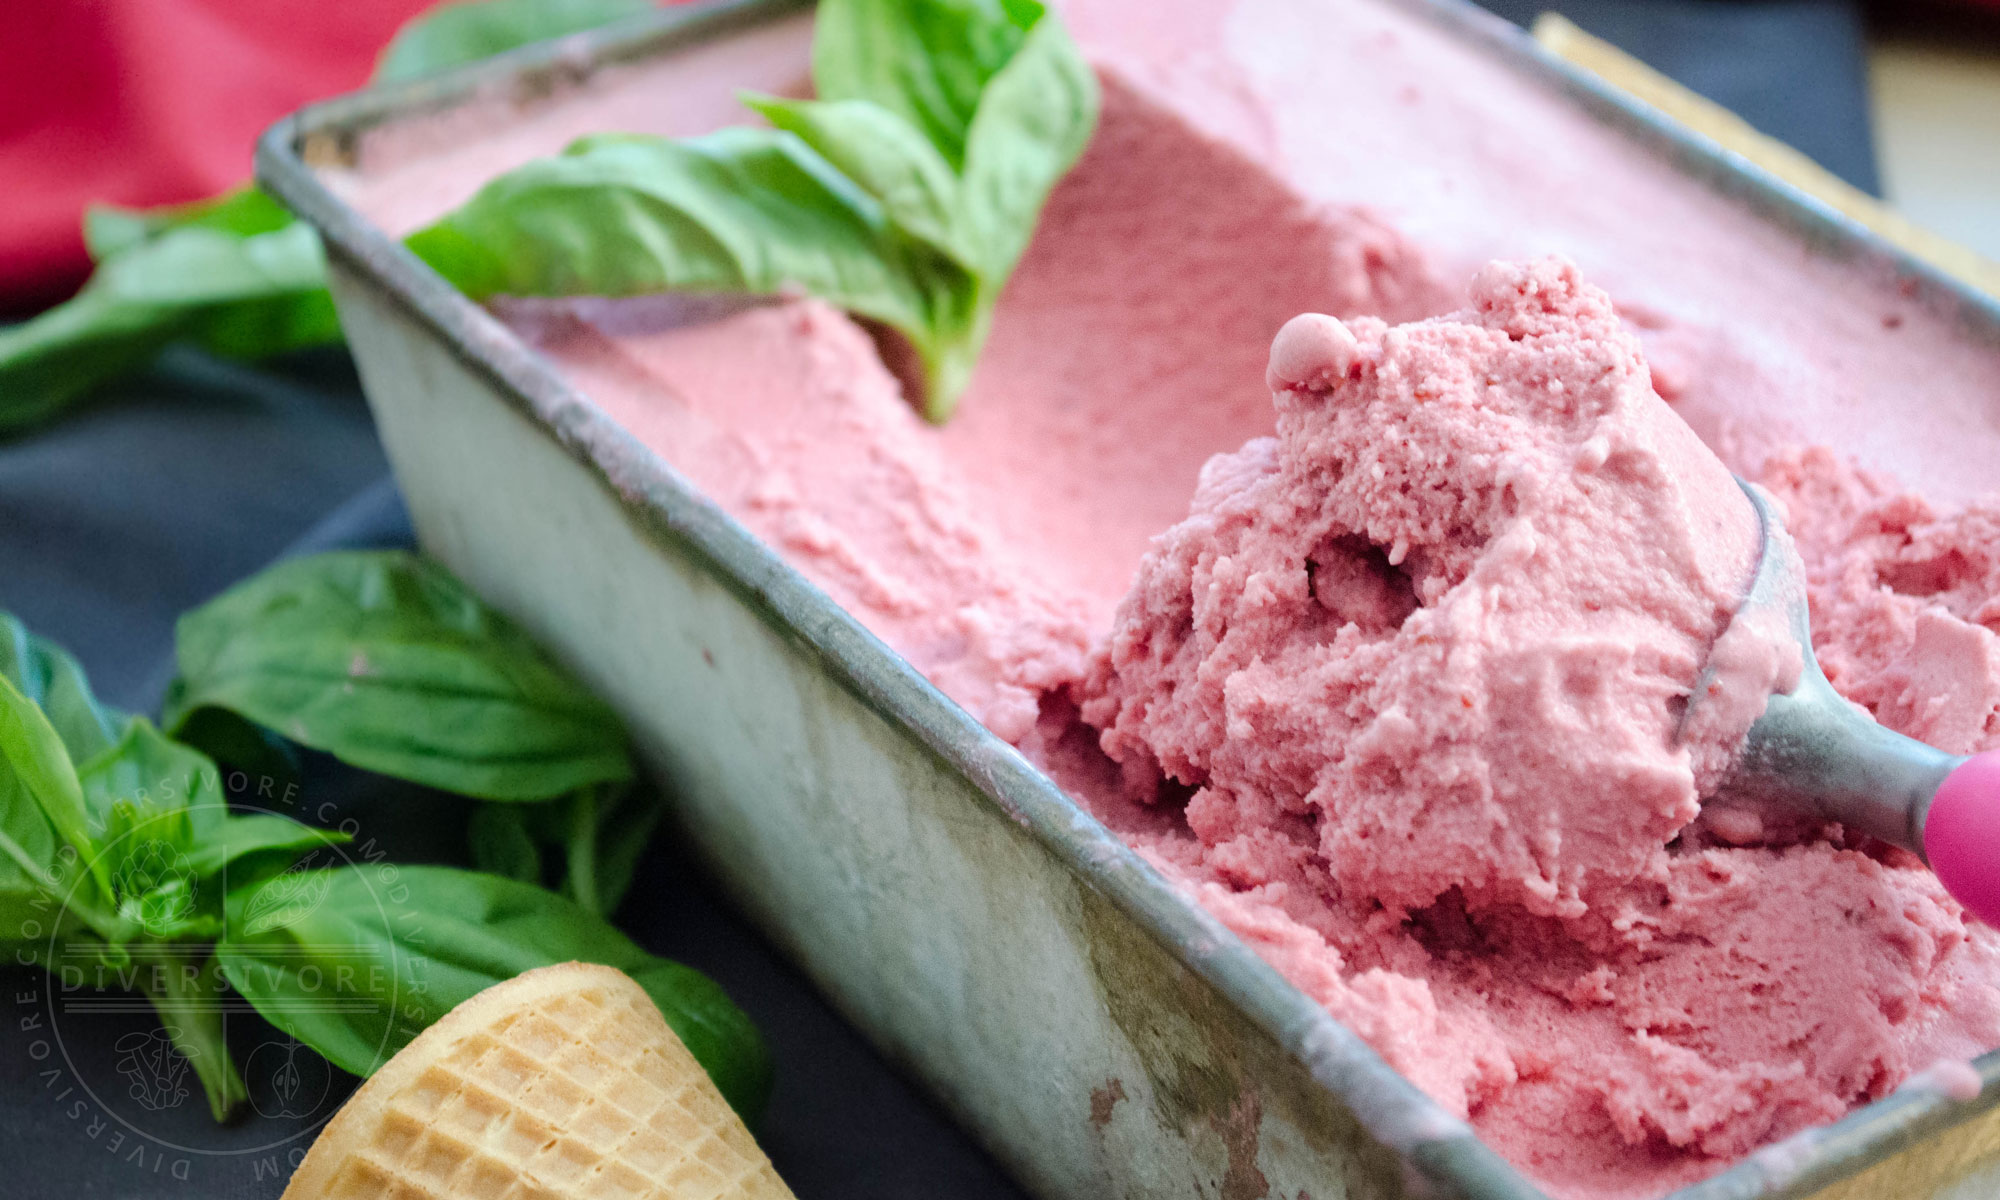 Featured image for “Strawberry, Basil, & Goat Cheese Ice Cream”